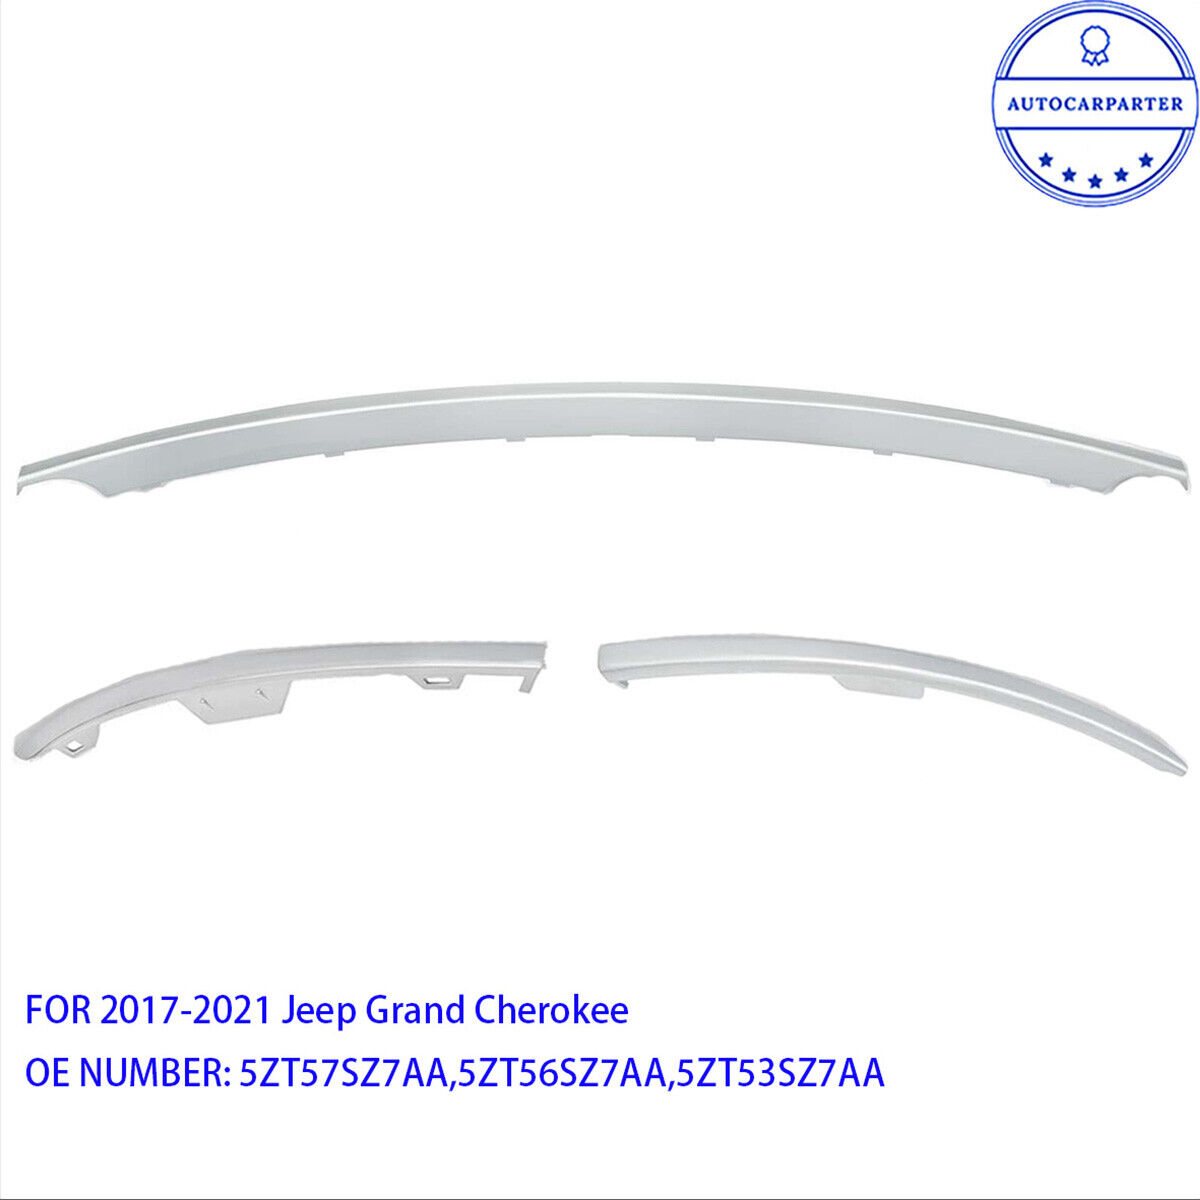 For 2017-2021 Jeep Grand Cherokee Front Lower Bumper Cover Grille Molding Trim